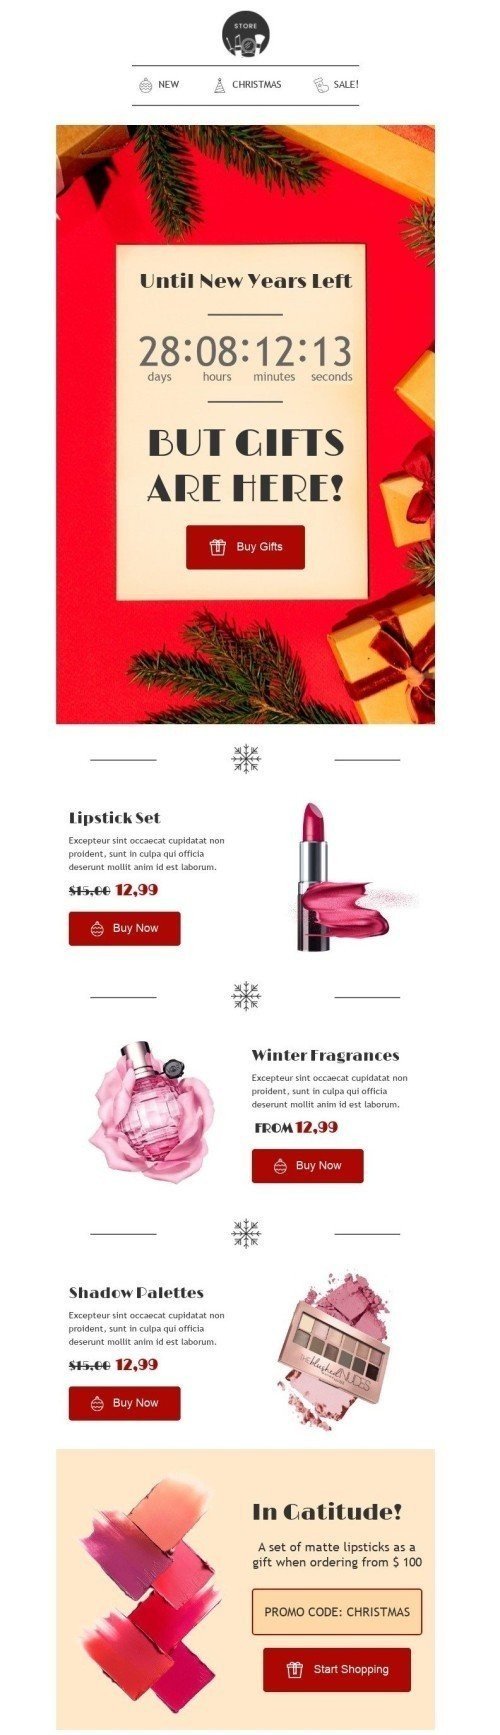 Christmas Email Template "Gifts are here" for Beauty & Personal Care industry mobile view